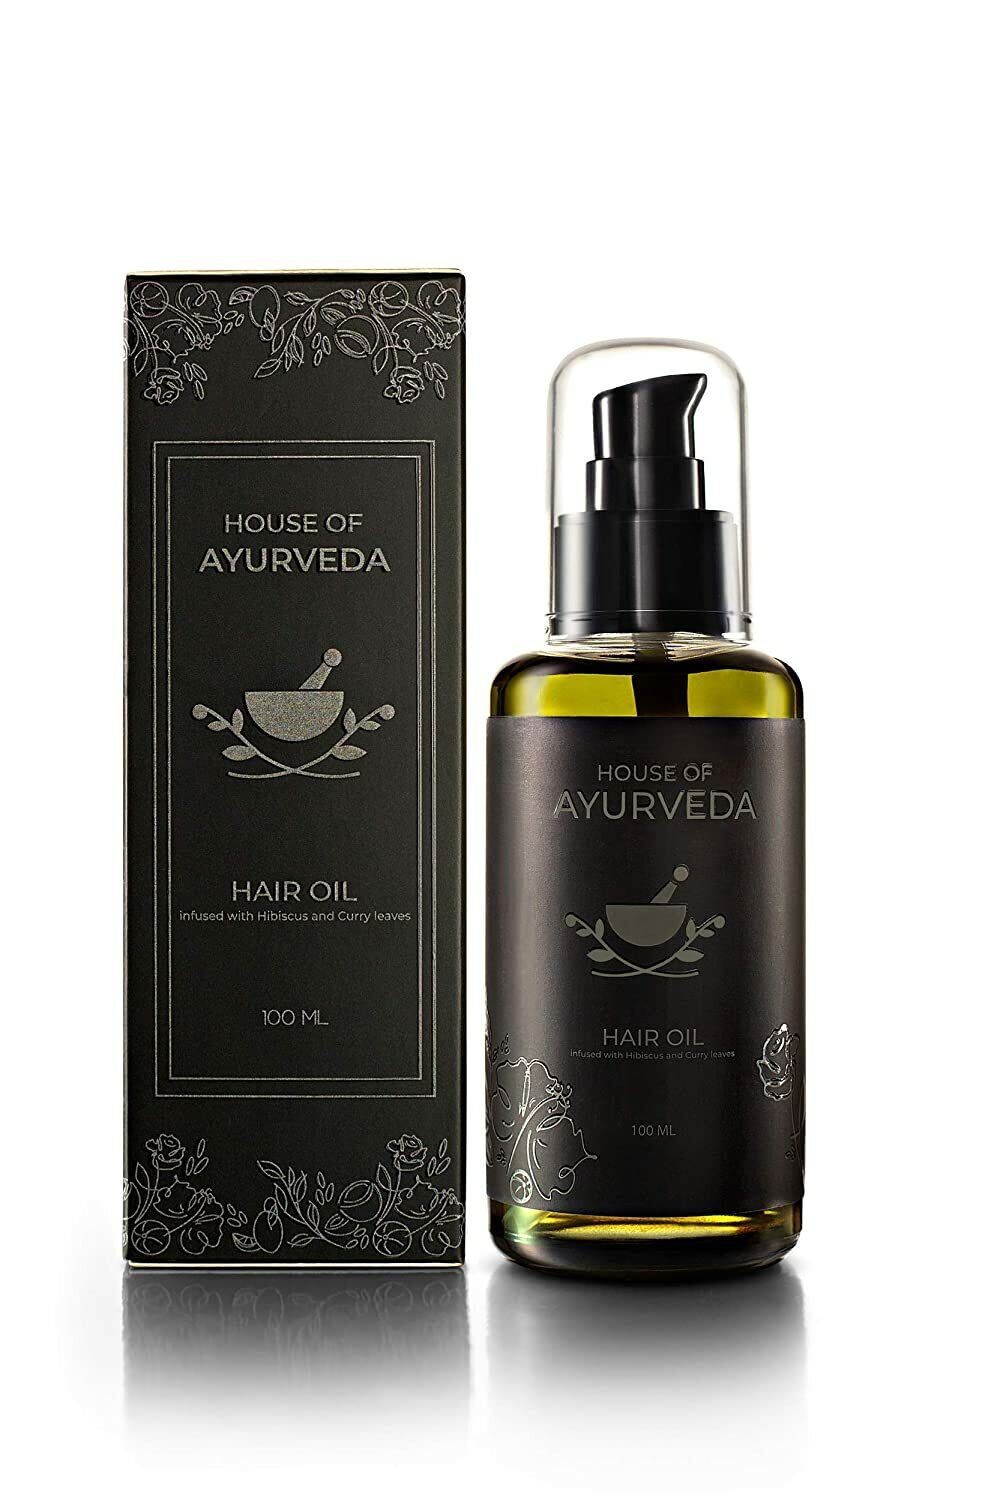 House Of Ayurveda Hibiscus and Curry leaves Hair Oil for Hair Fall Control  100ml | eBay